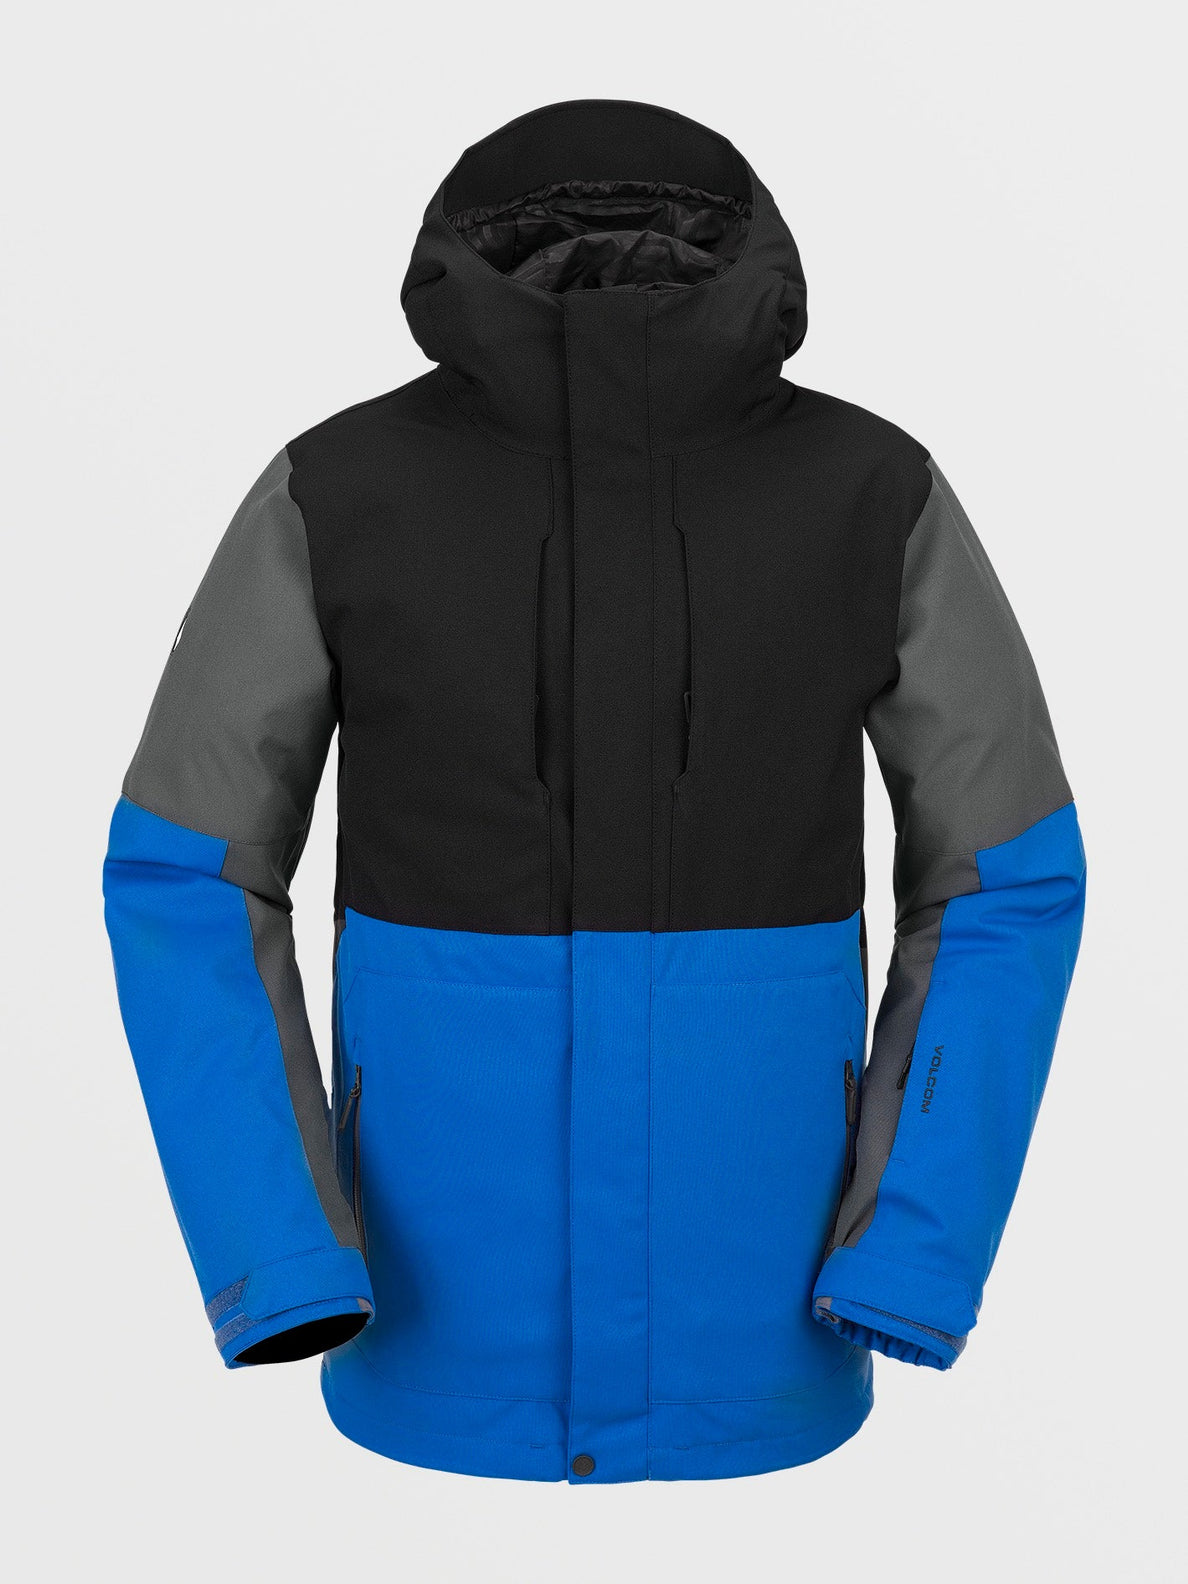 V.Co Op Insulated Jacket - ELECTRIC BLUE (G0452407_EBL) [F]